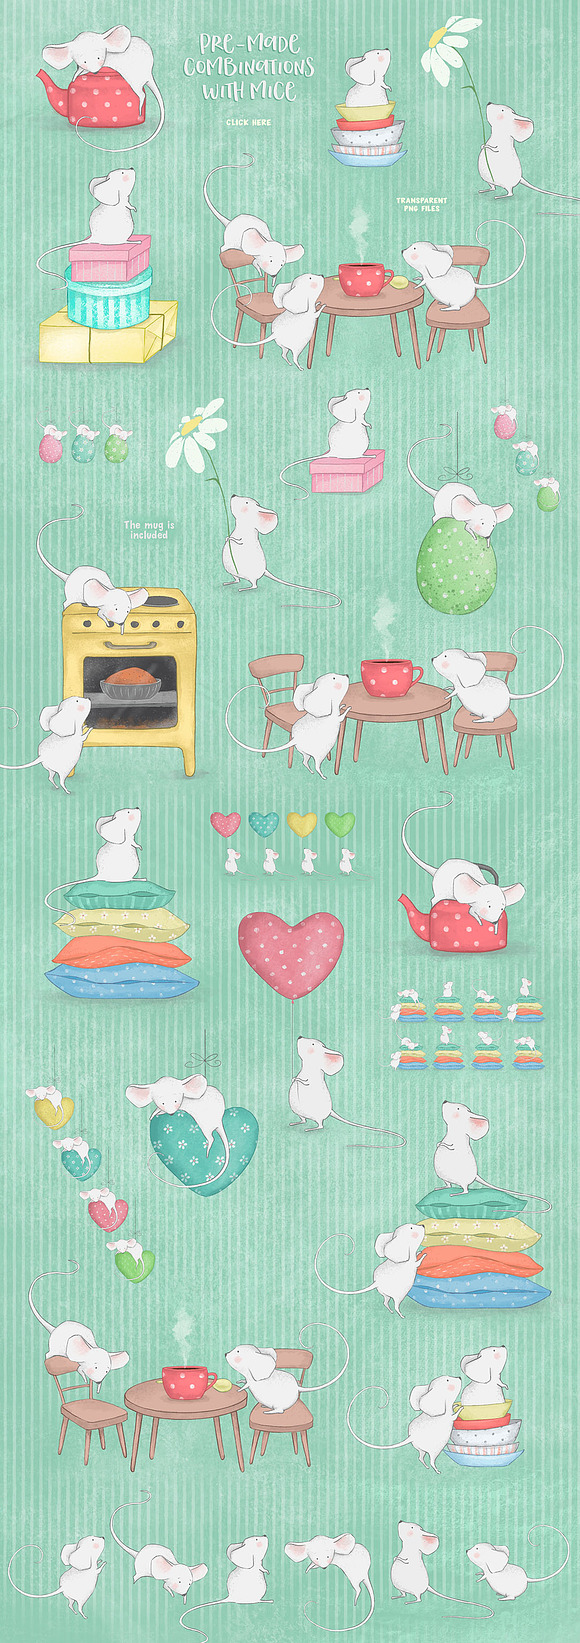 Little Cuties Illustrations in Illustrations - product preview 11